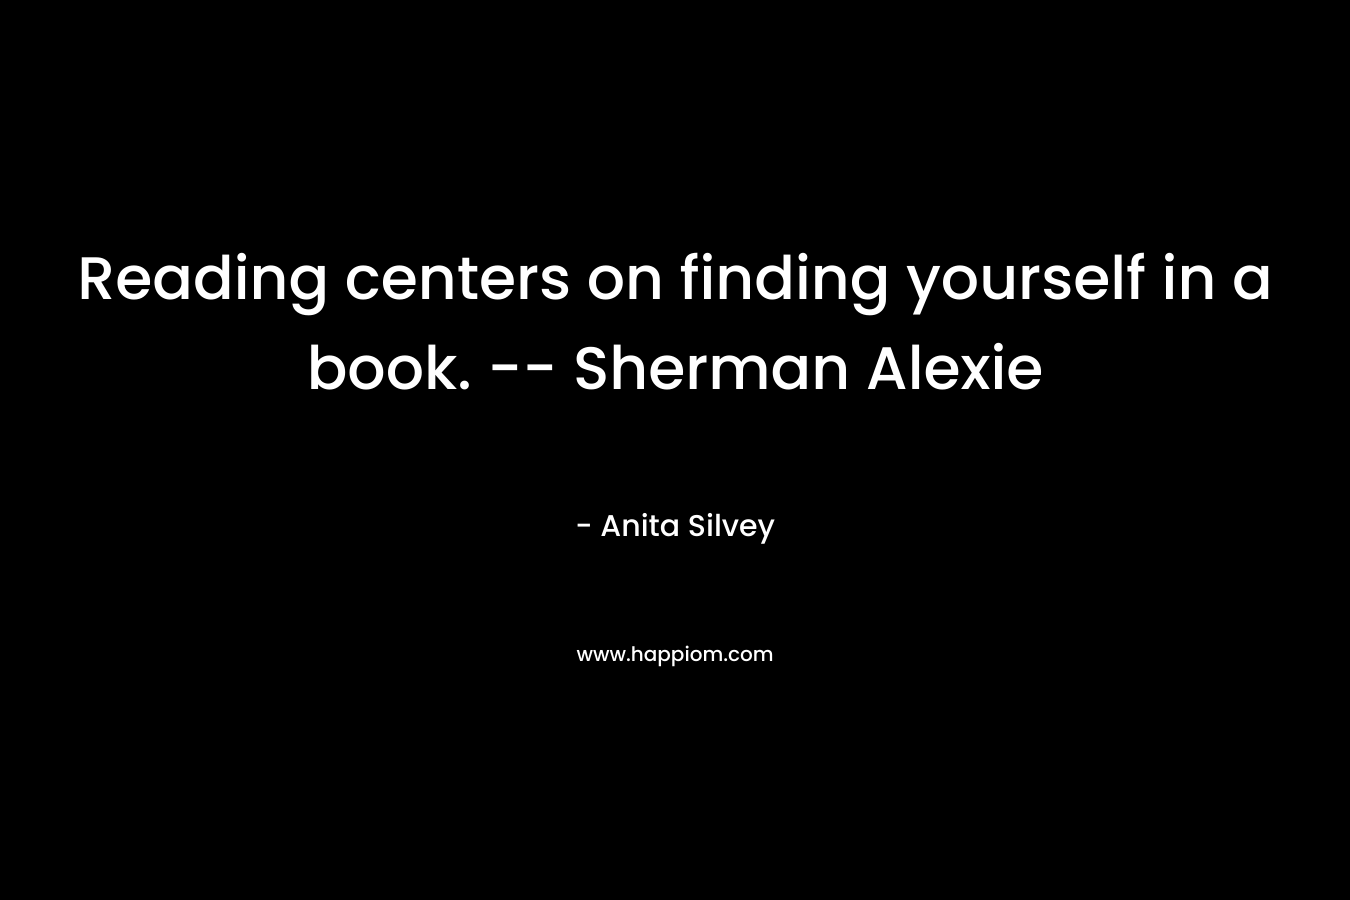 Reading centers on finding yourself in a book. -- Sherman Alexie